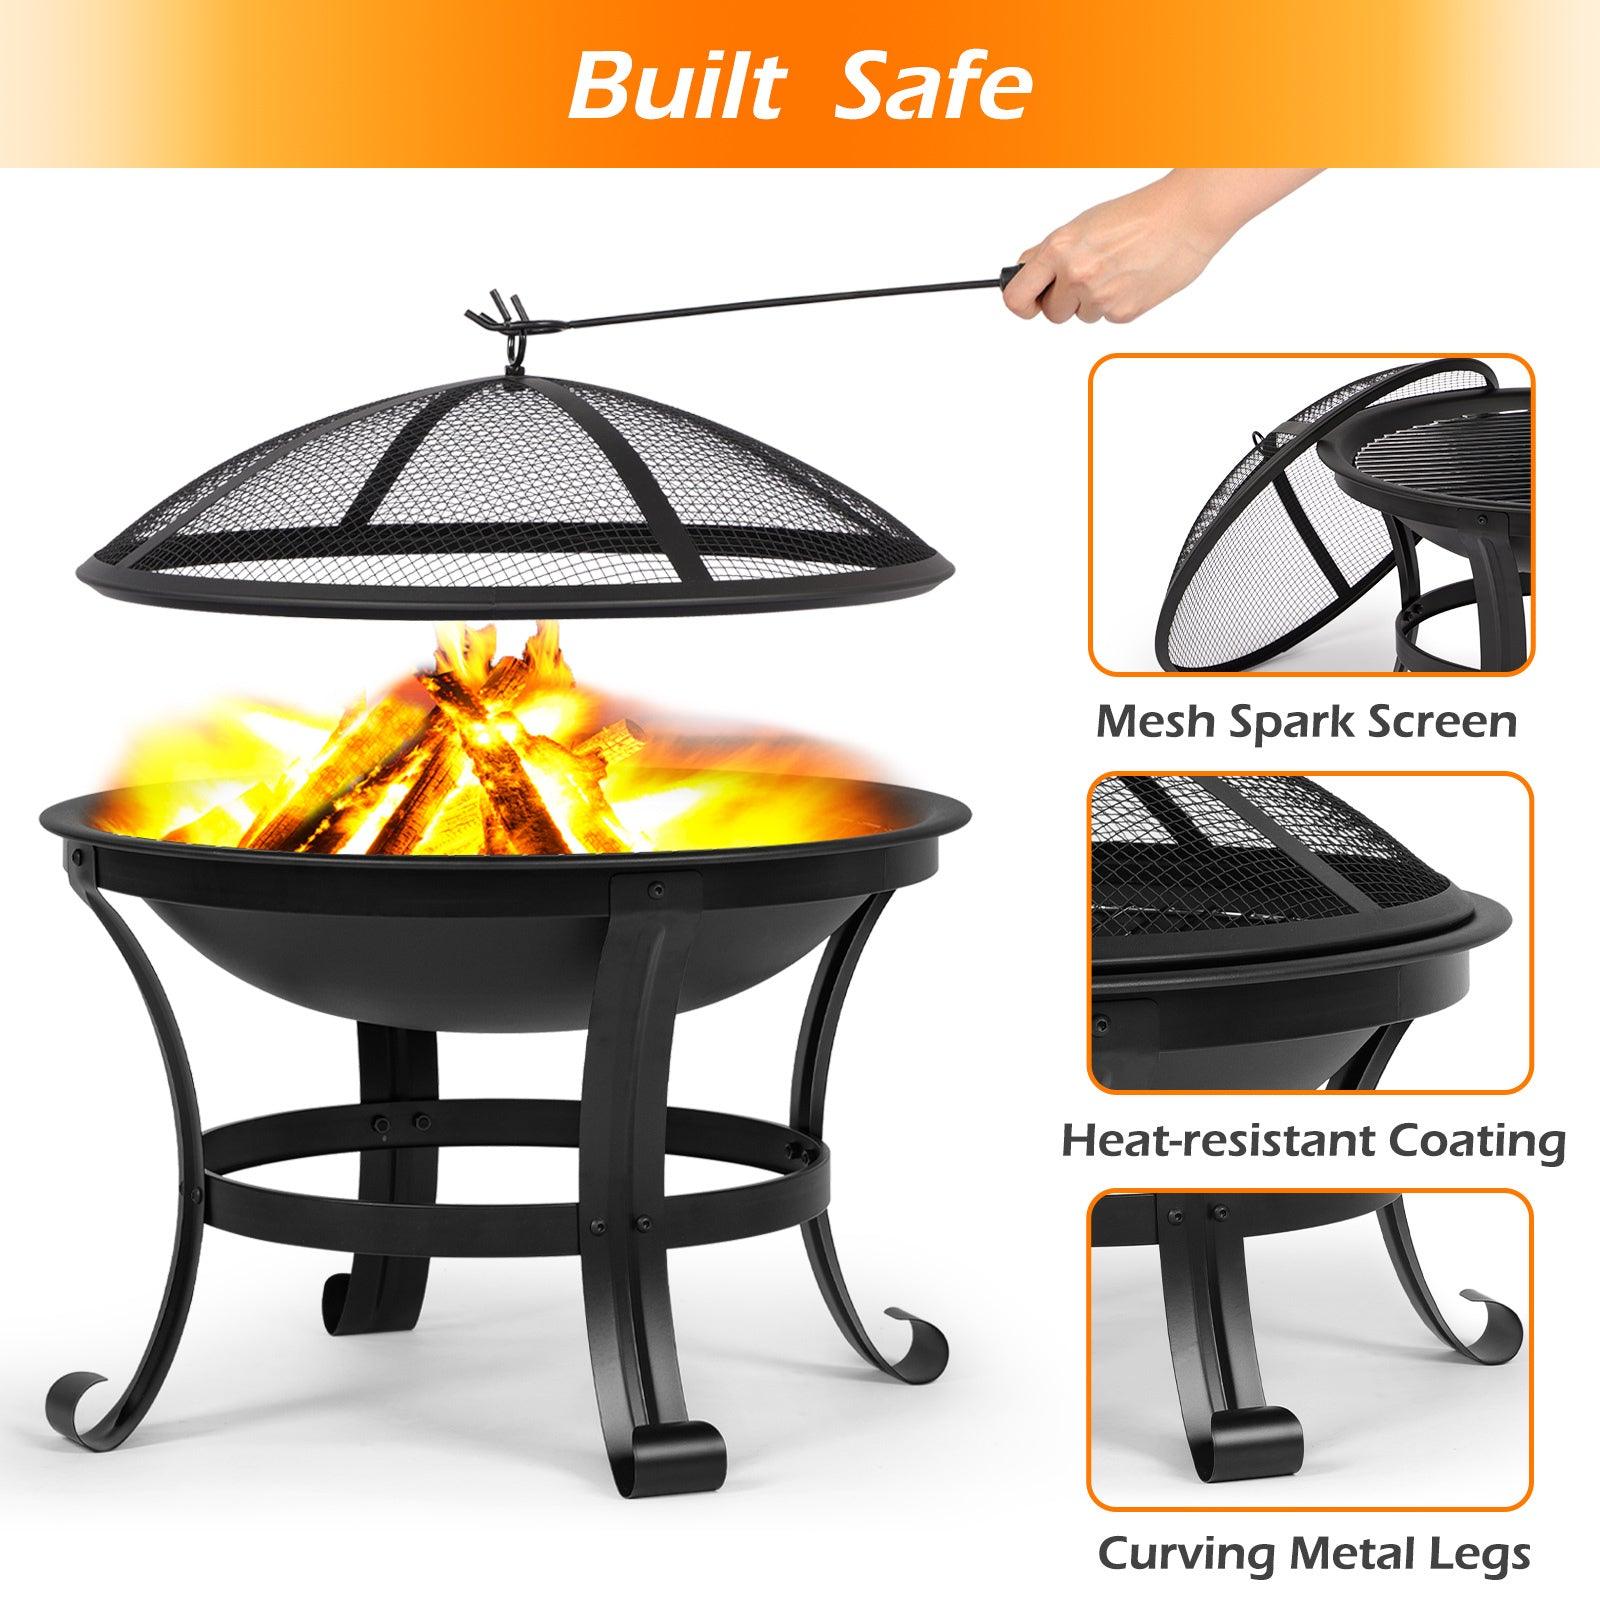 Fire Pit with Grill for Garden 56cm 3 in 1 - Charming Spaces